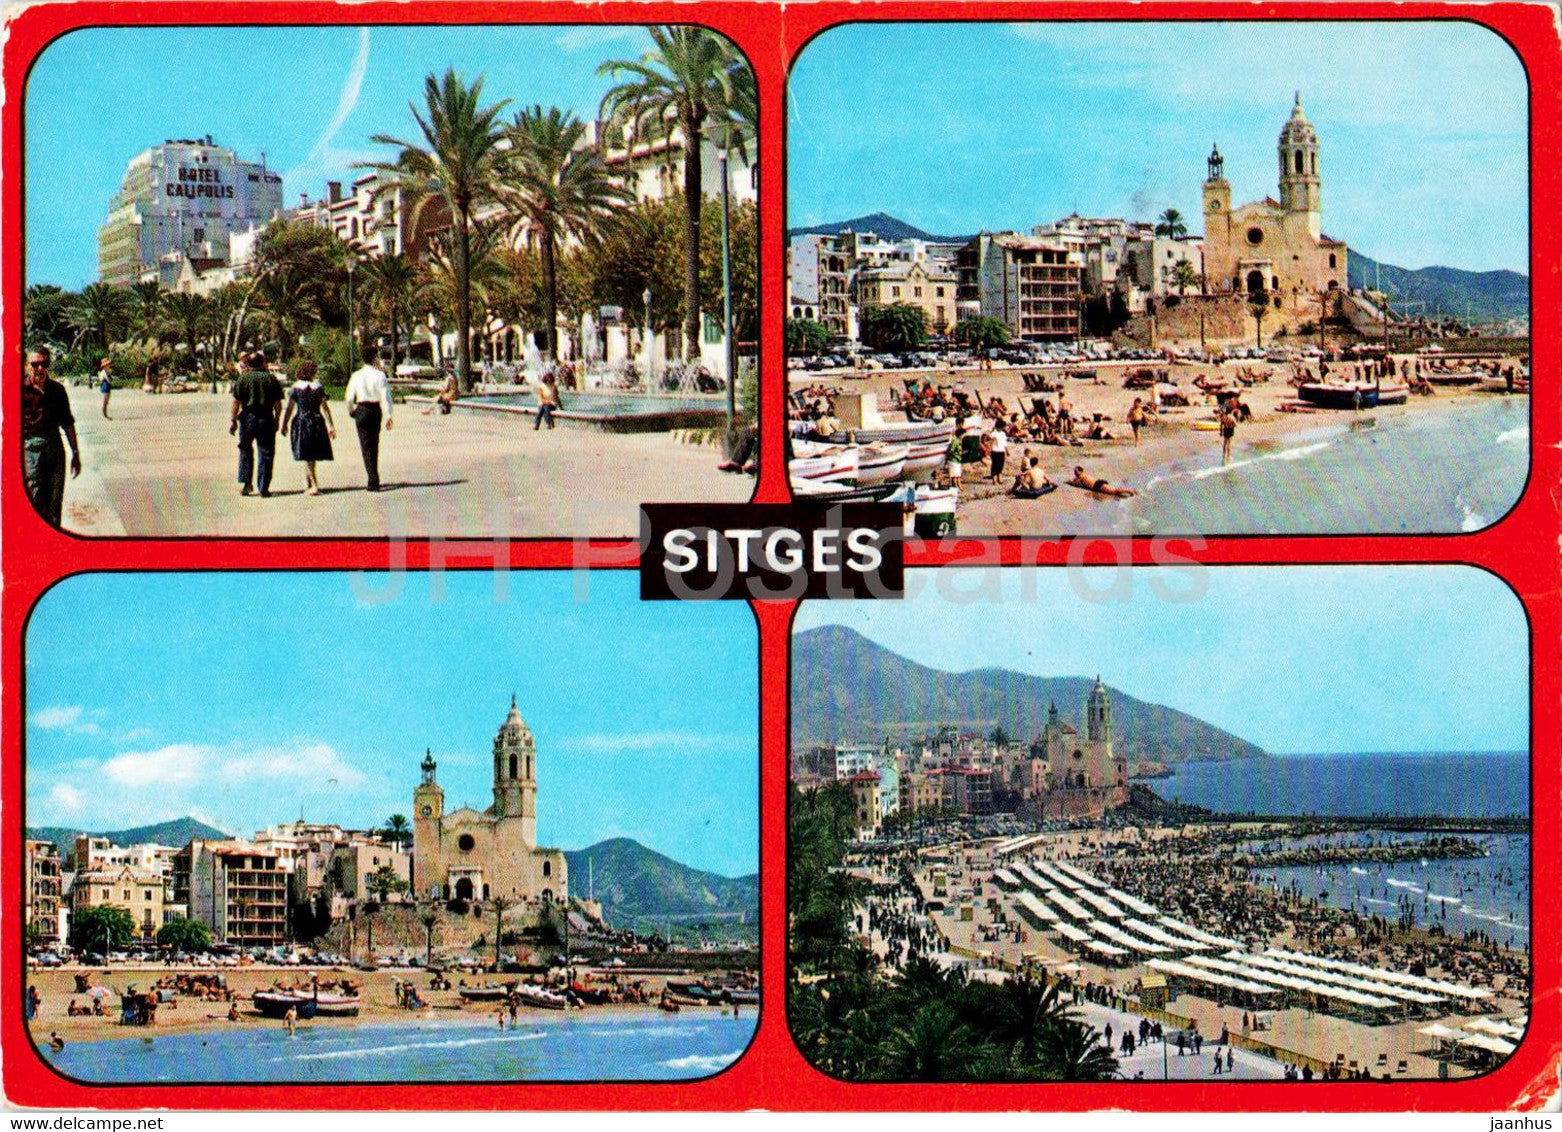 Sitges - multiview - 561 - 1972 - Spain - used - JH Postcards